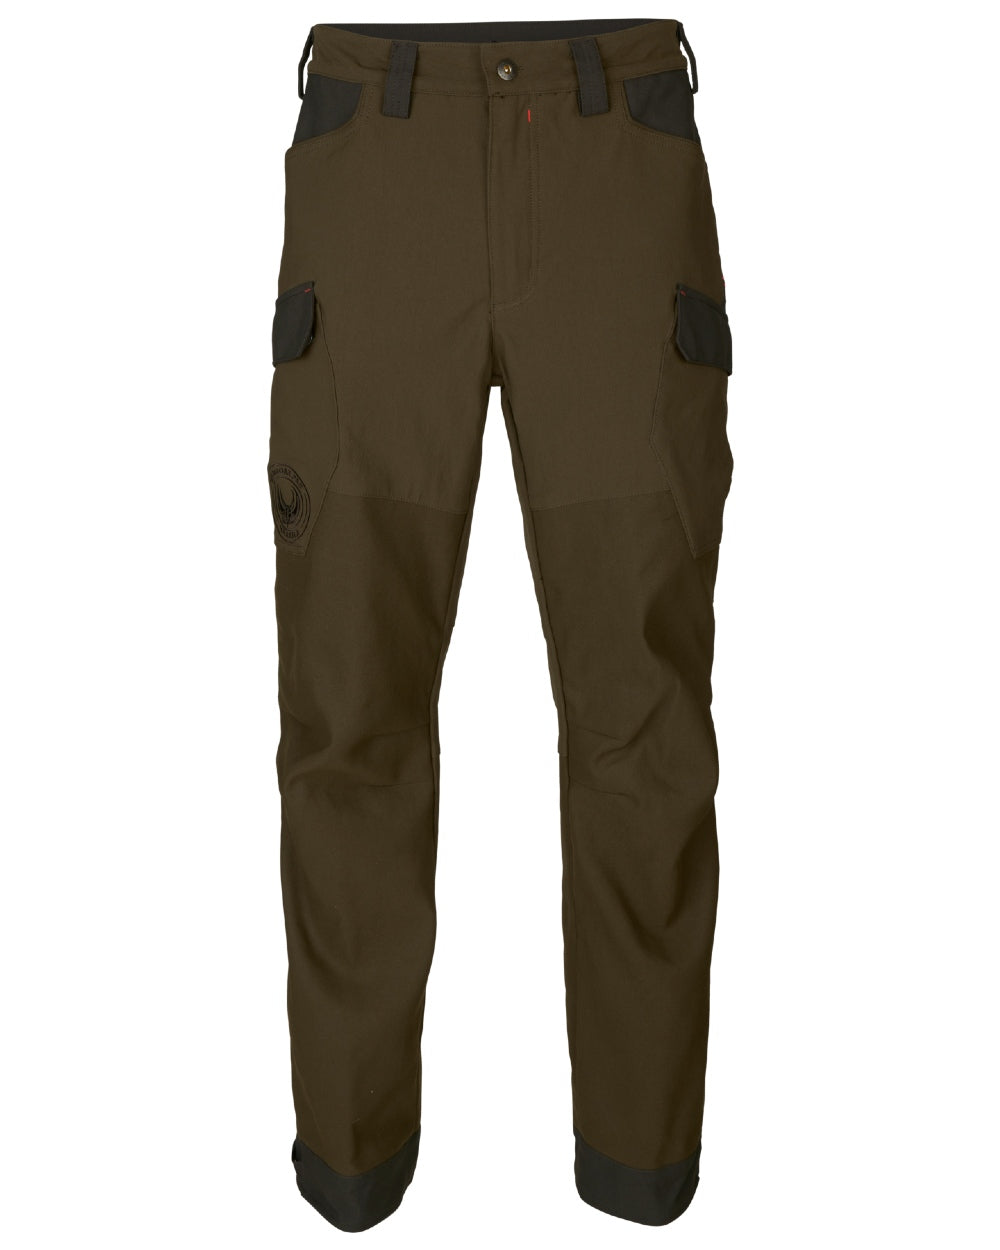 Willow Green coloured Harkila Wildboar Pro Move Trousers front on white background